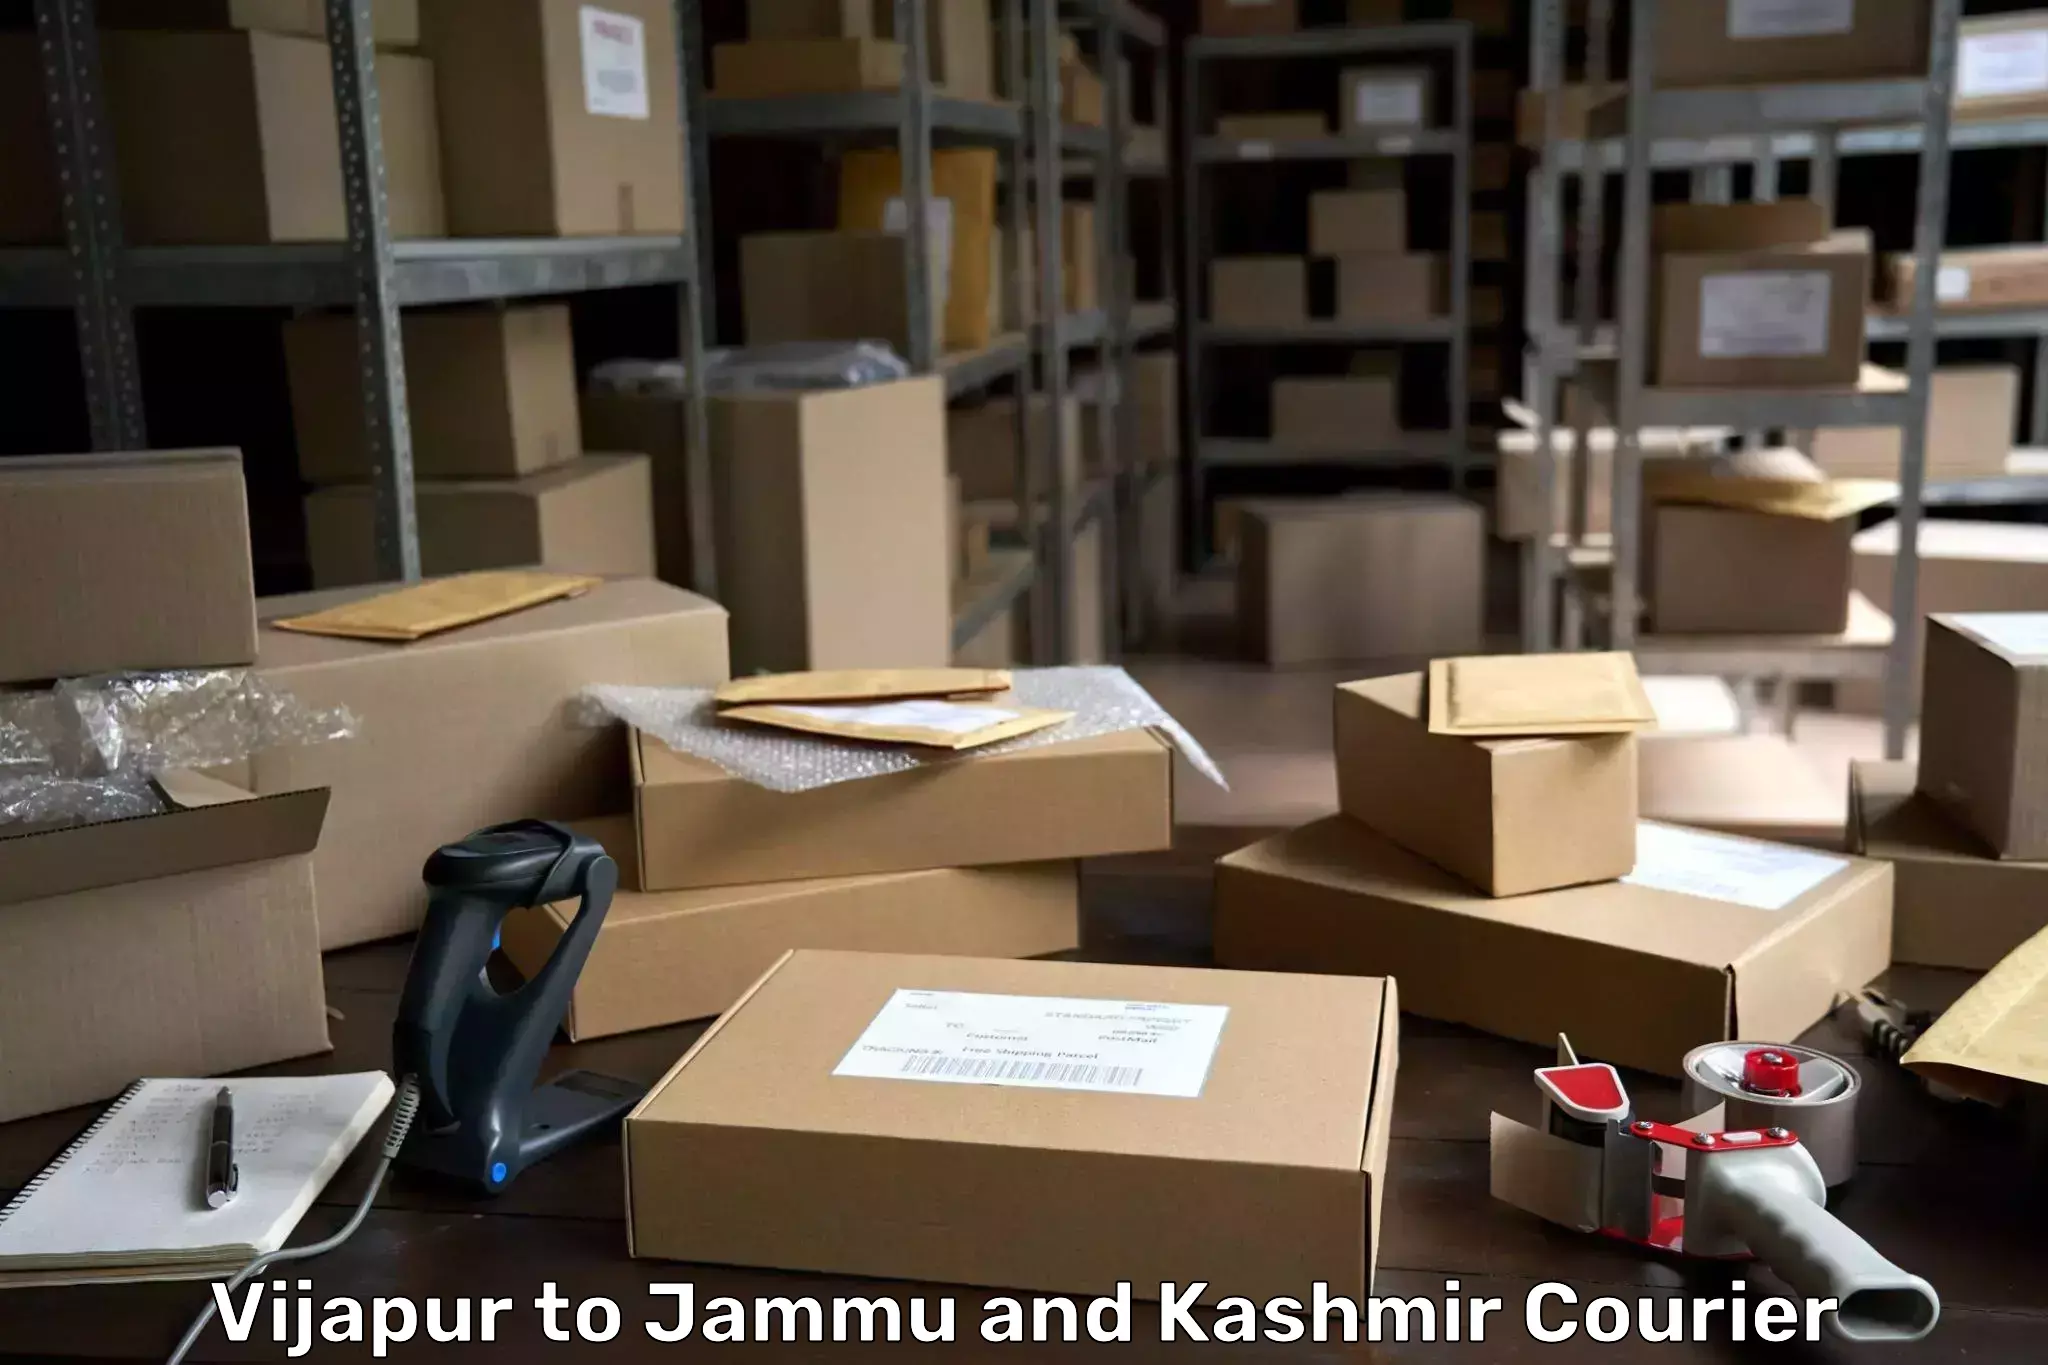 State-of-the-art courier technology Vijapur to Anantnag